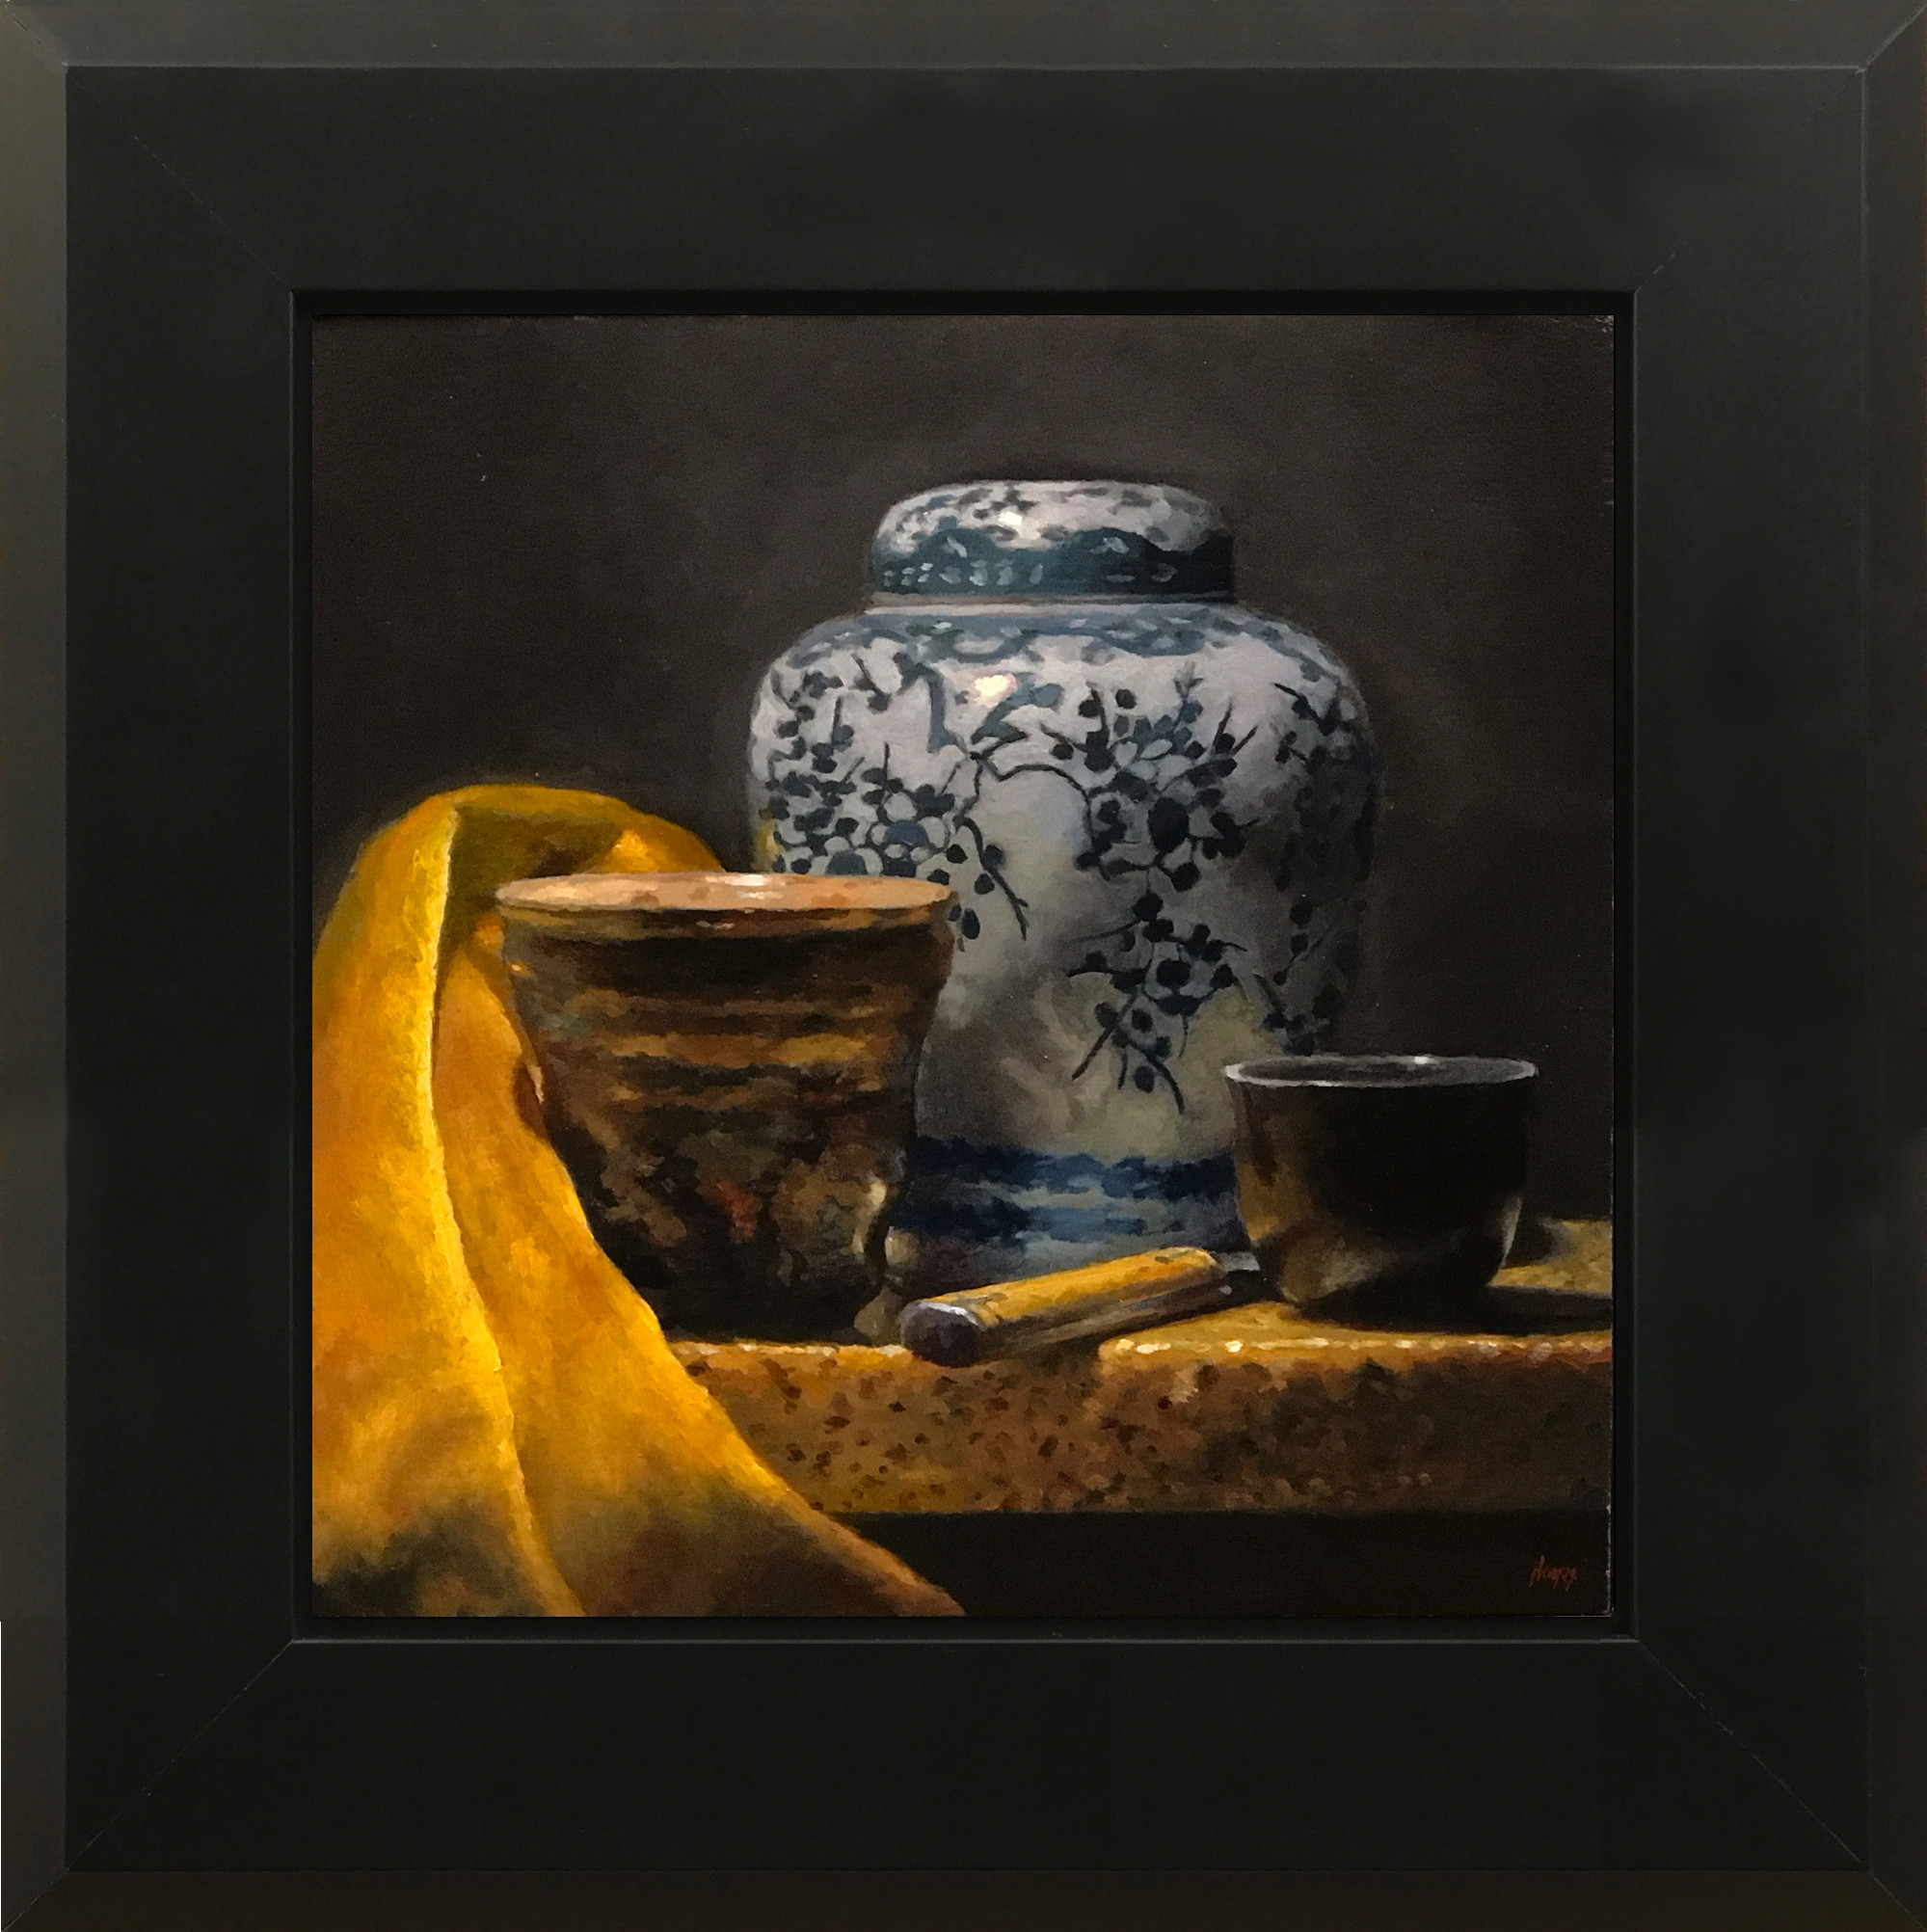 "Handmade Cups and Ginger Jar"
View this painting